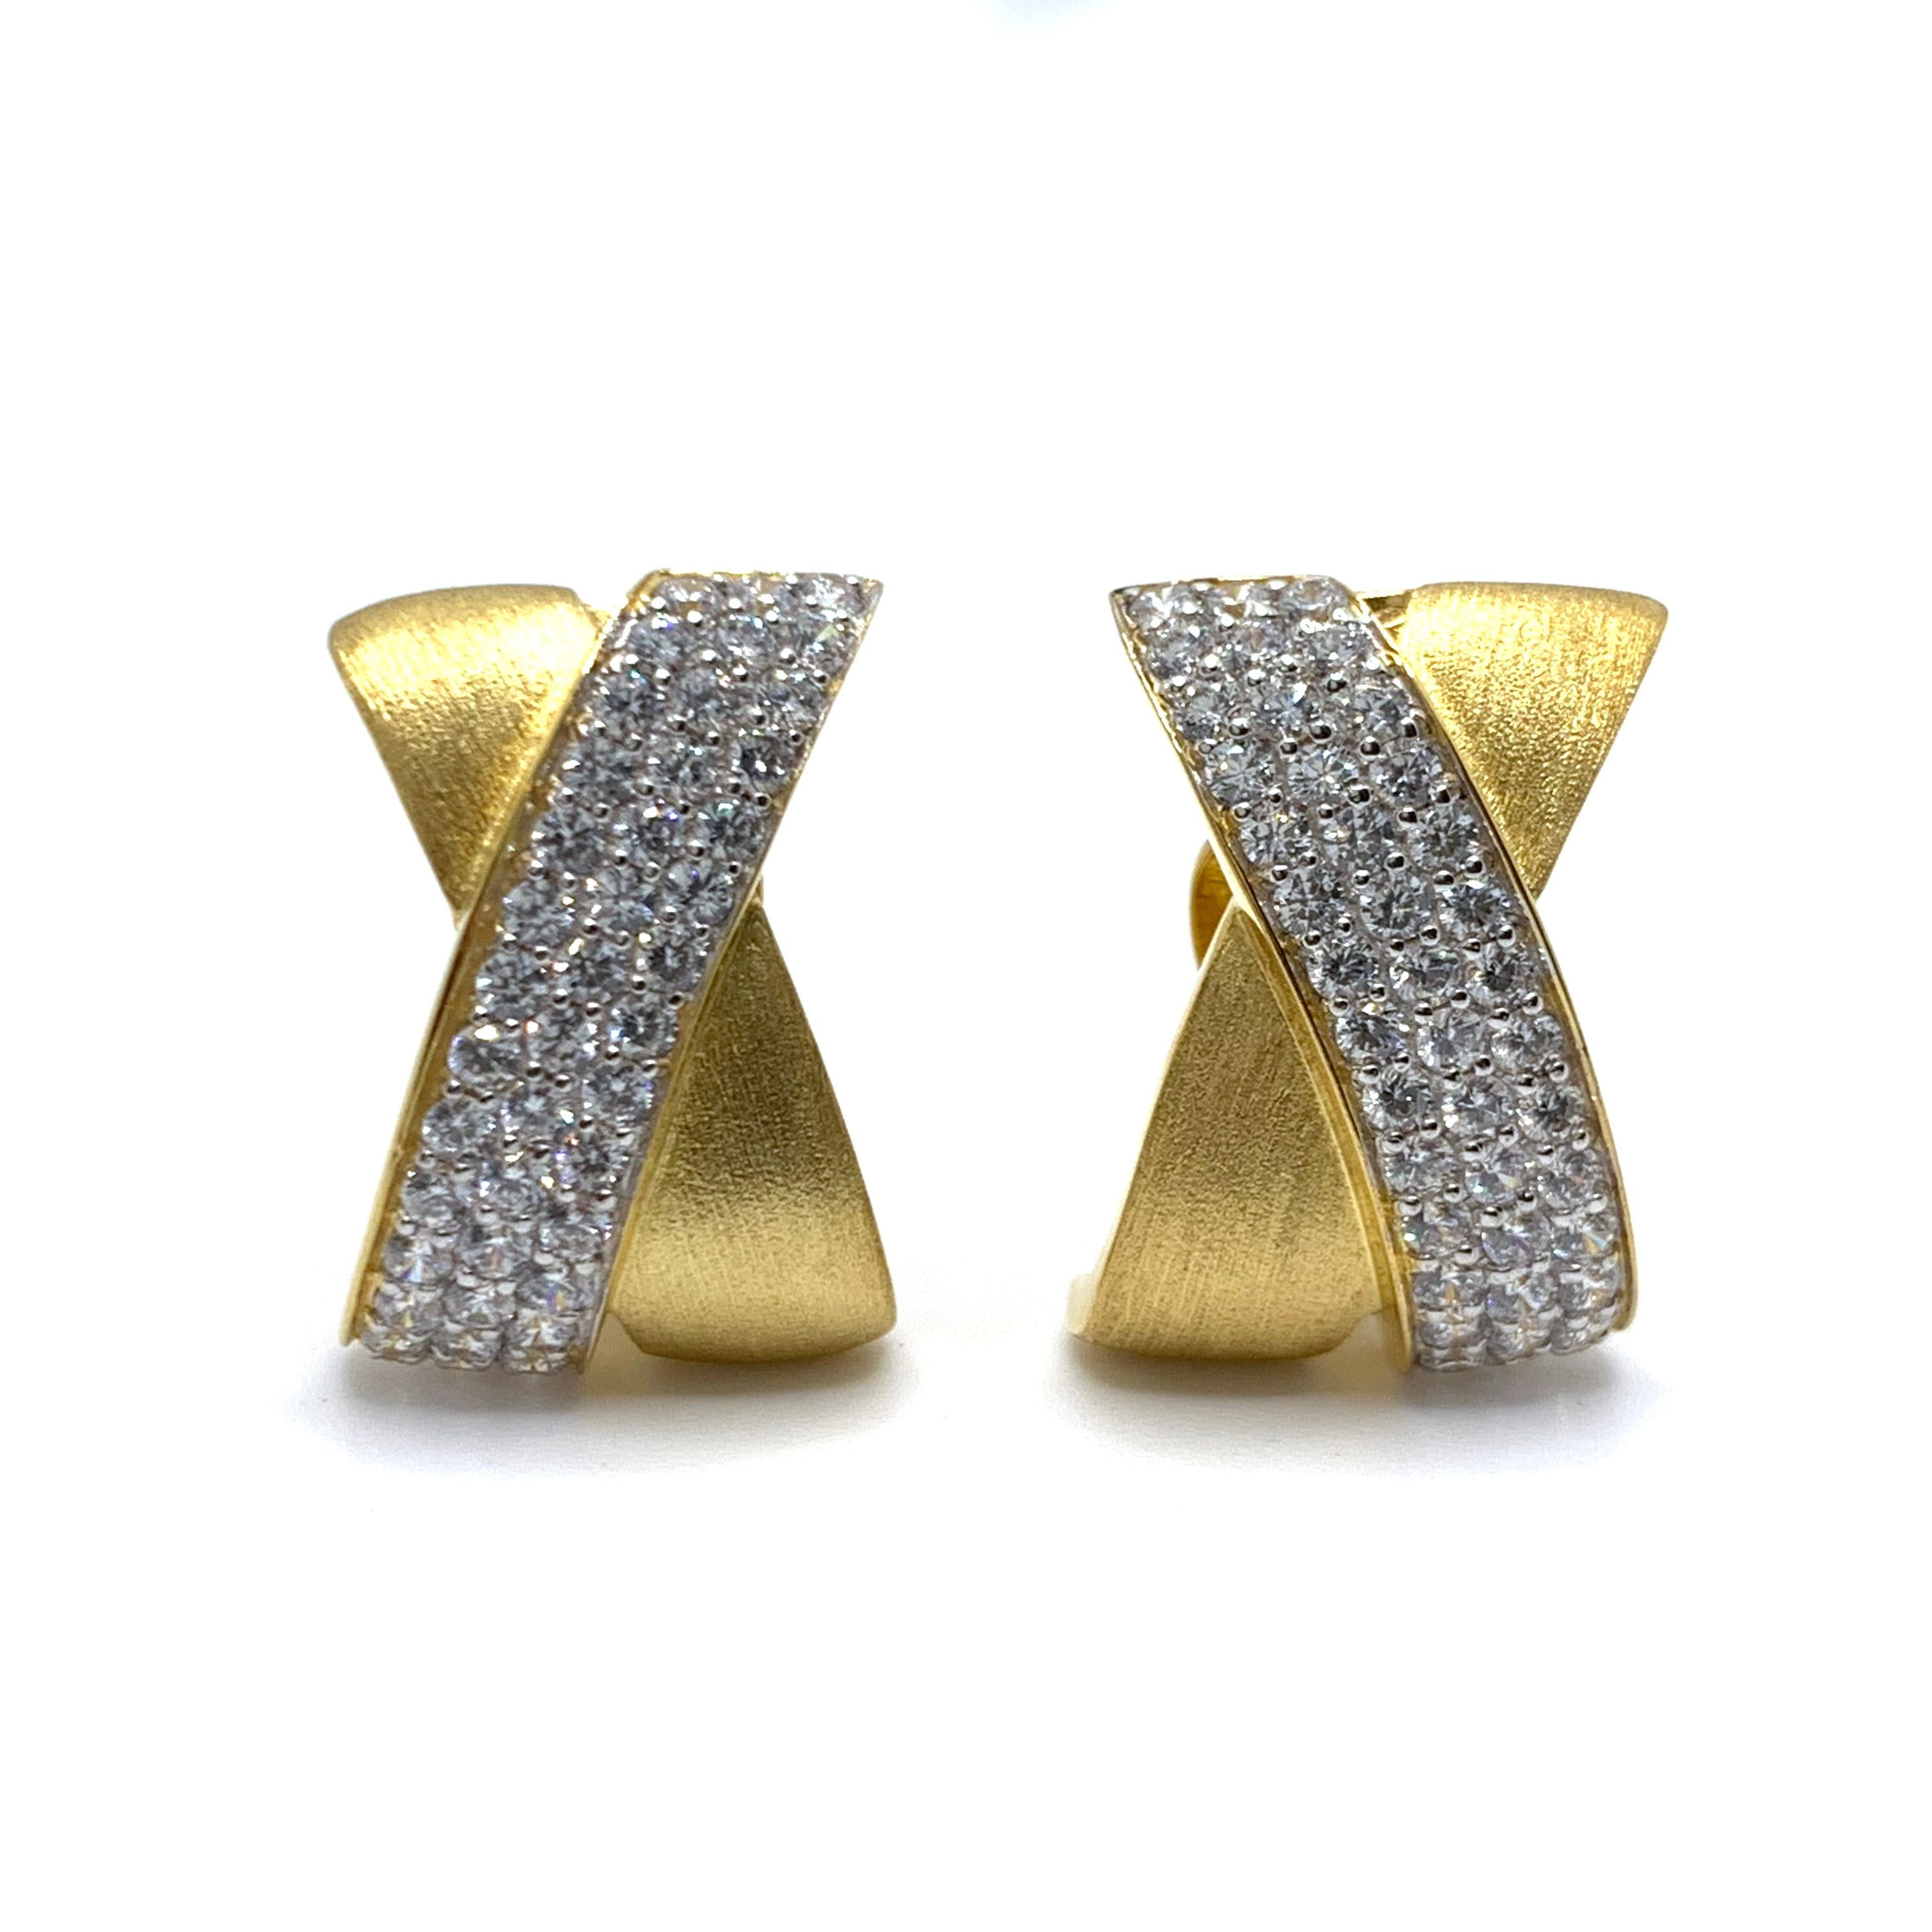 Bijoux Num's Sophisticated X-shape Pave and Vermeil Clip-on Earrings

These classic and sophisticate-style earrings feature 90pcs of round simulated diamonds pave-handset in 18k yellow gold vermeil over sterling silver, large and comfortable clip